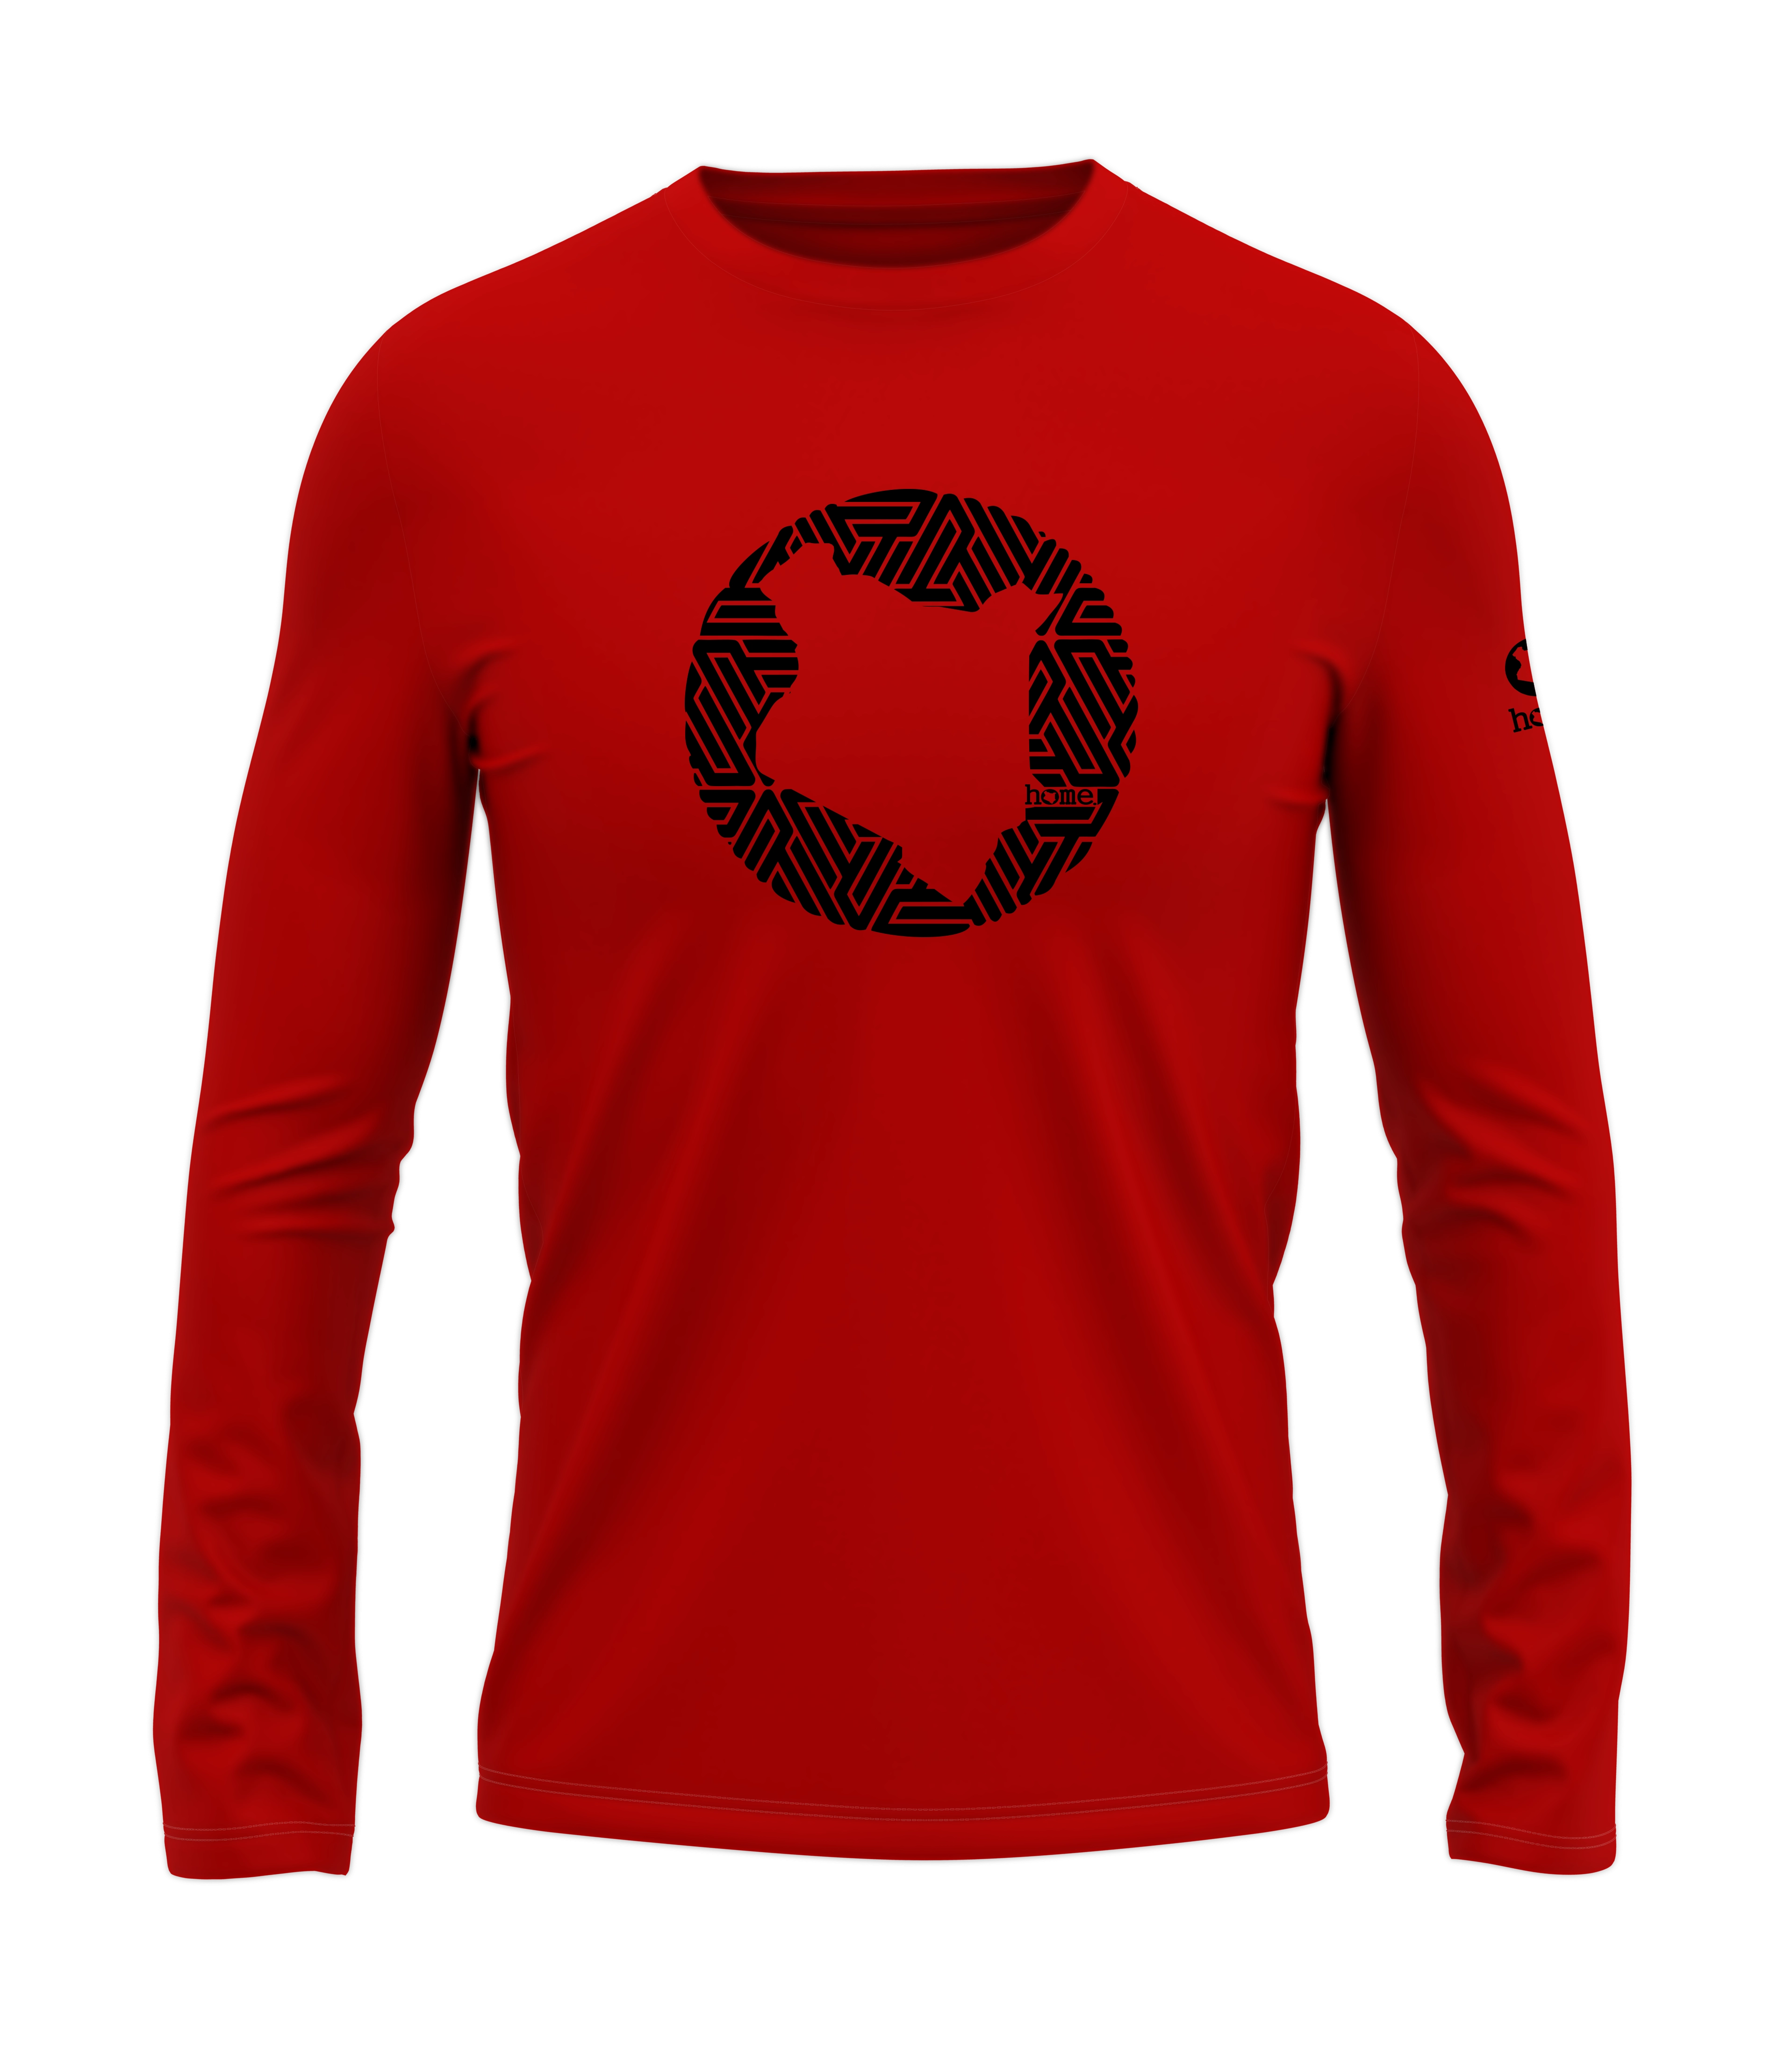 home_254 LONG-SLEEVED RED T-SHIRT WITH A BLACK MAP PRINT – COTTON PLUS FABRIC